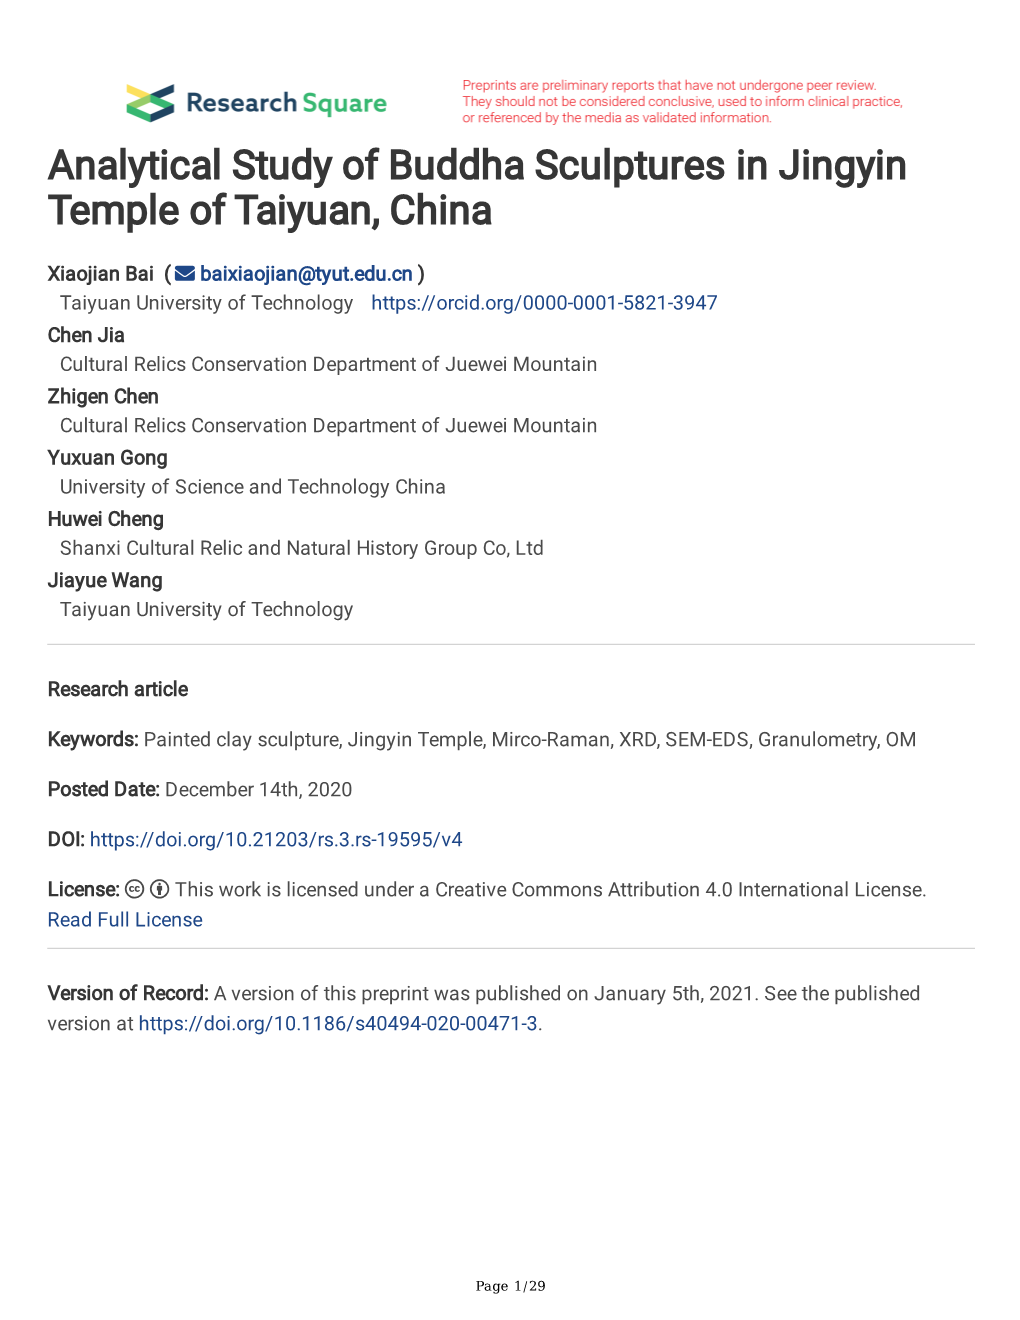 Analytical Study of Buddha Sculptures in Jingyin Temple of Taiyuan, China